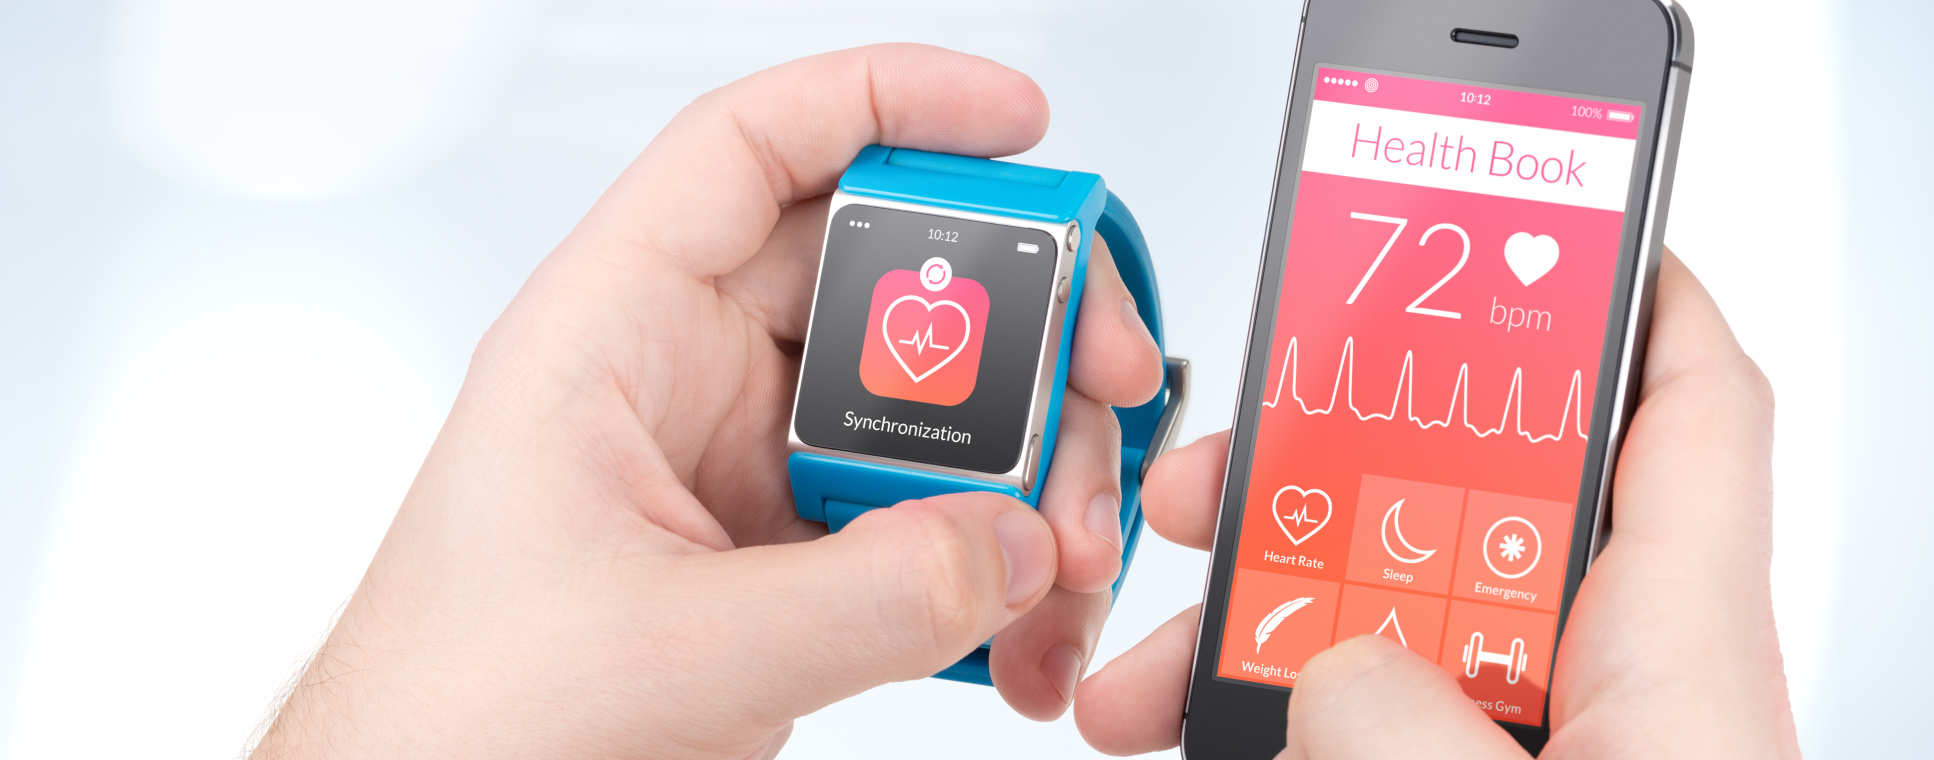 A pair of holds holding a phone and a smartwatch displaying health information